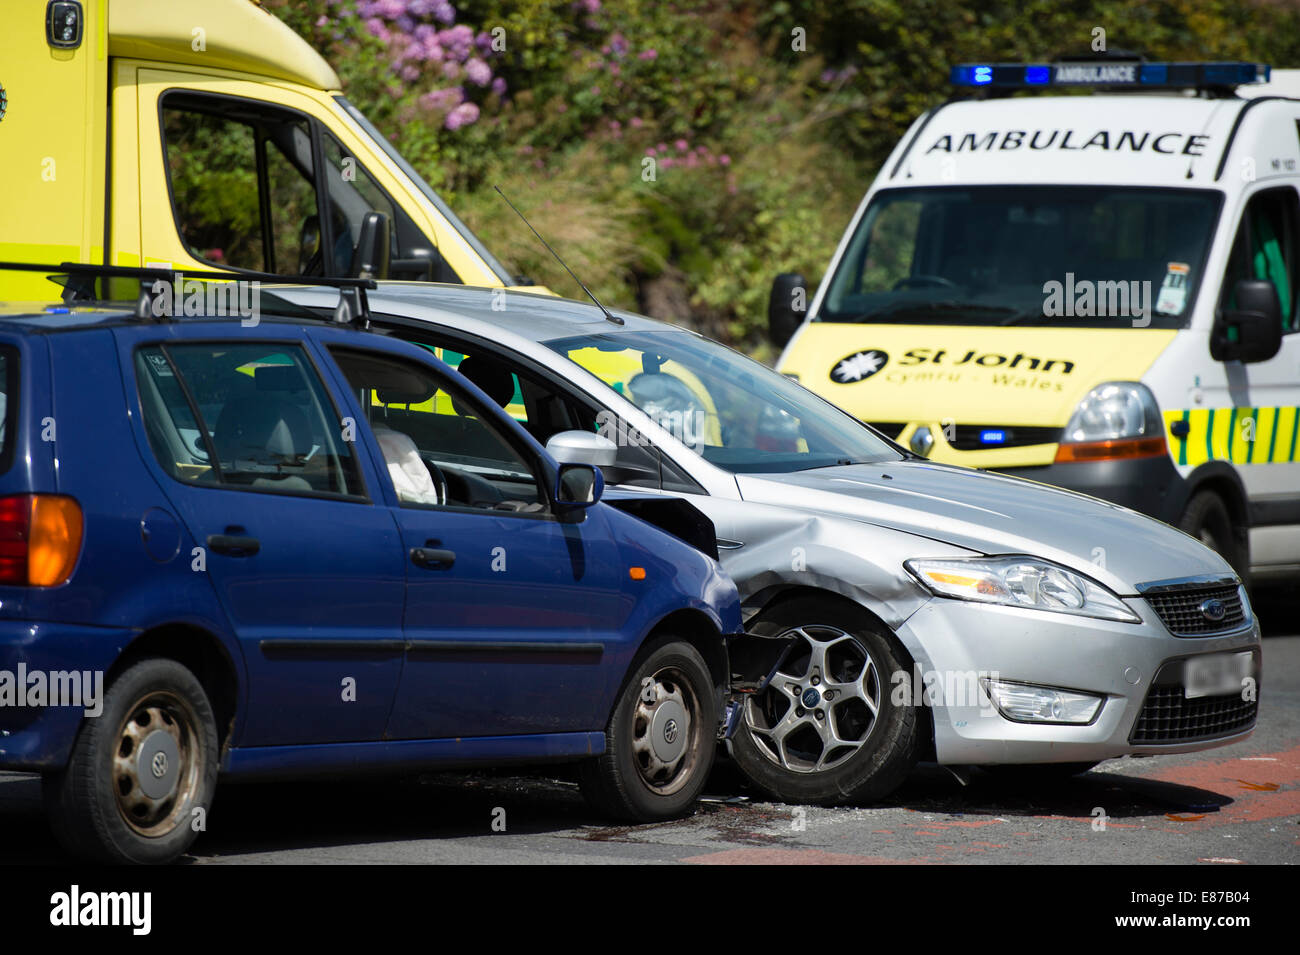 Two cars involved in a side impact road traffic accident collision, with ambulance in attendance UK Stock Photo